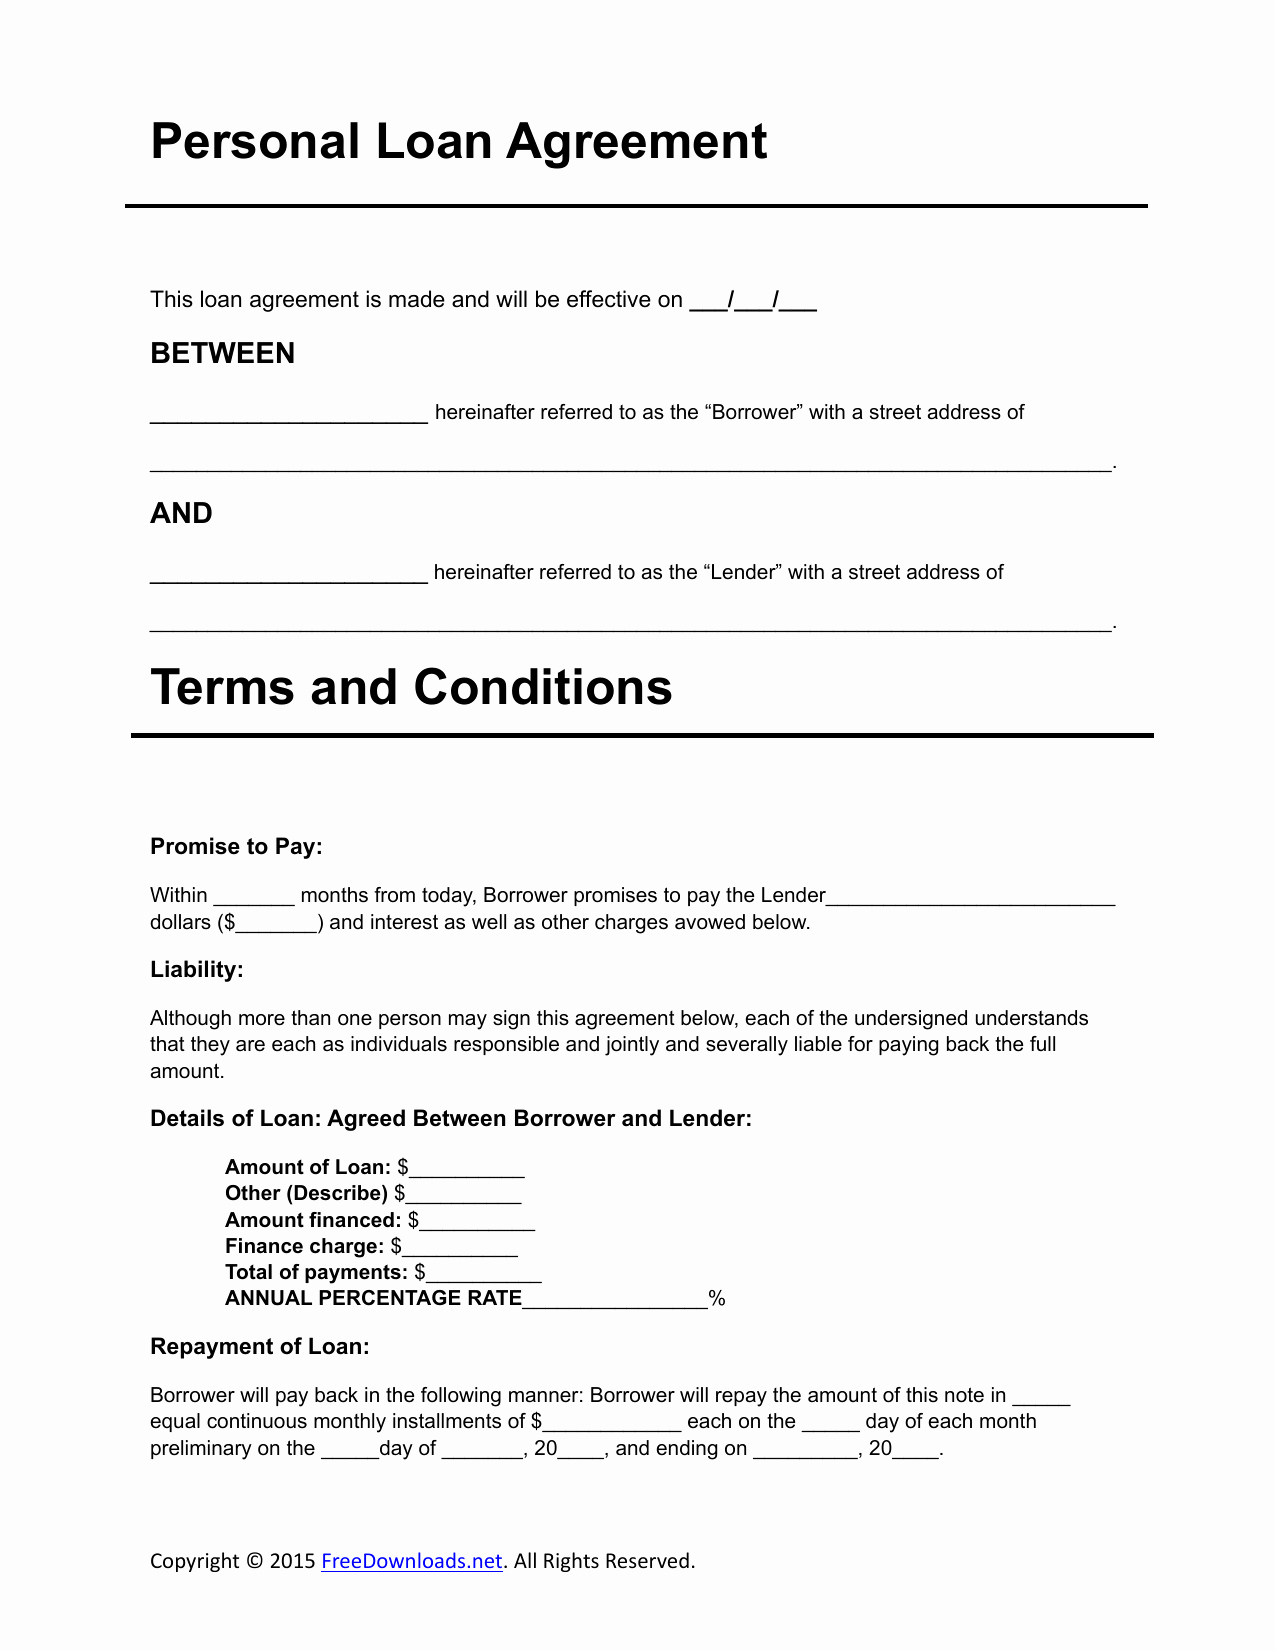 Personal Loan Contract Template Free Best Of Download Personal Loan Agreement Template Pdf